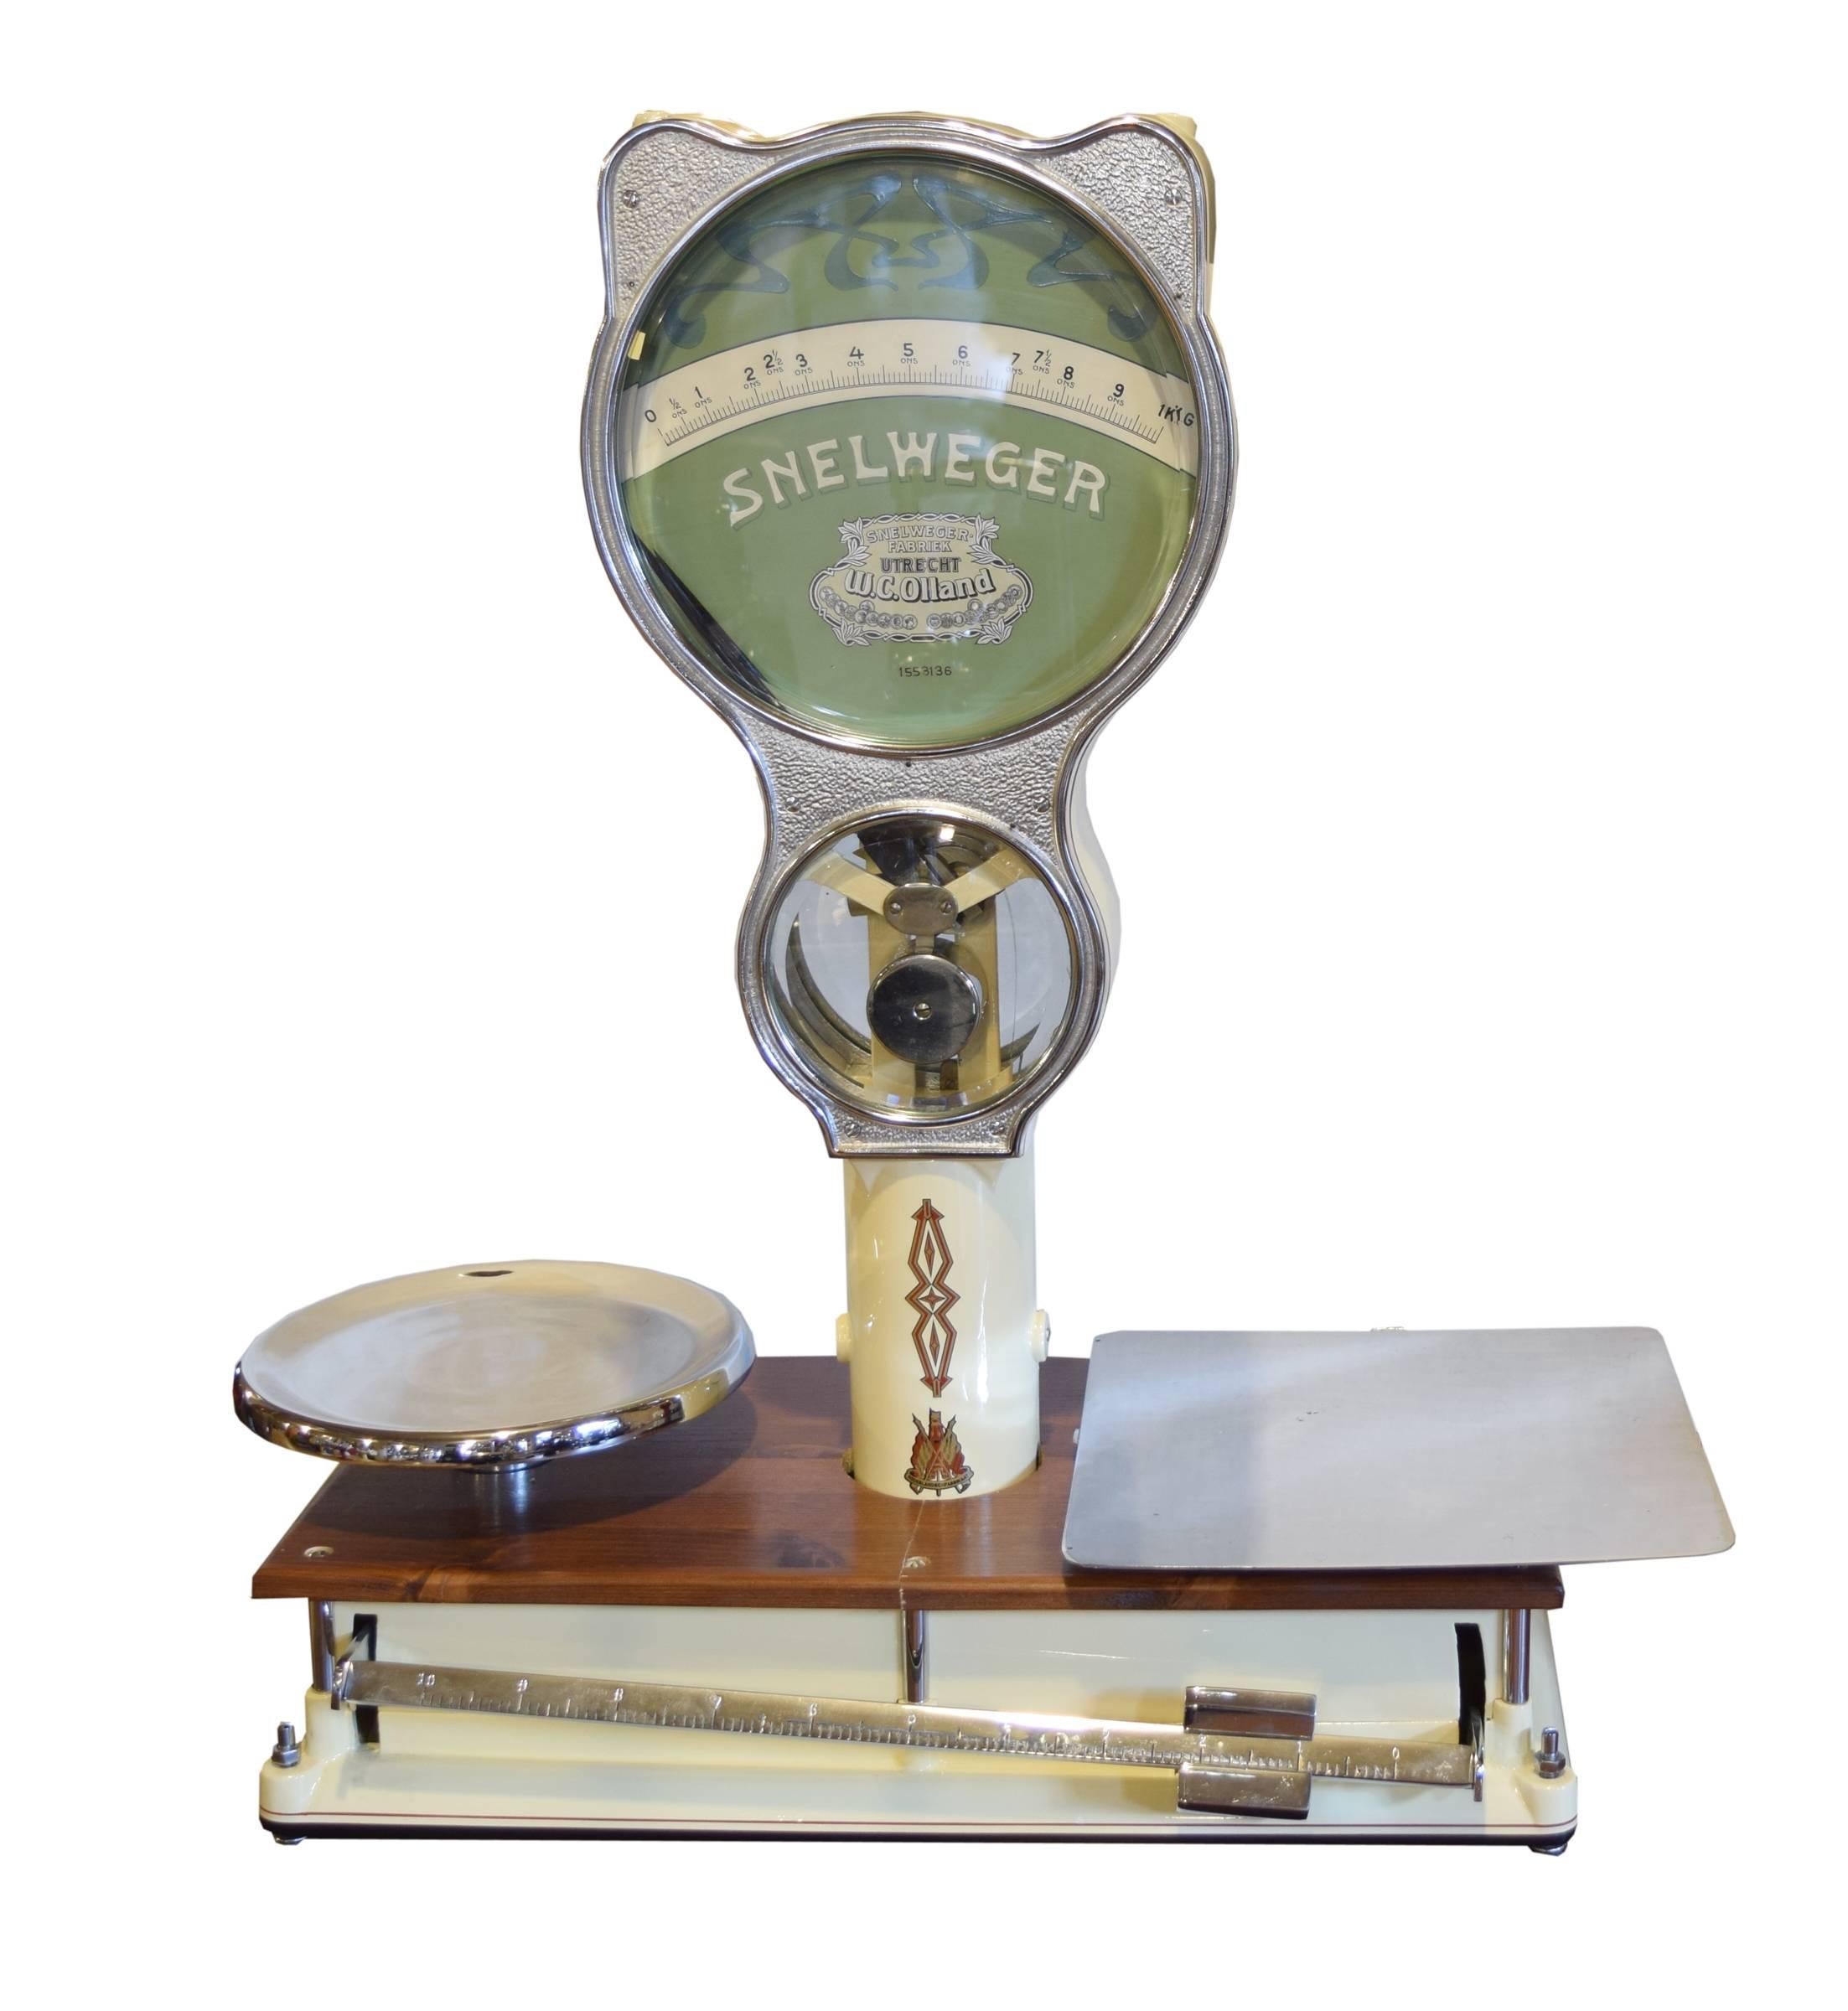 A rare WC Olland shop scale in immaculate condition. This model 178 scale was manufactured from 1907 through the 1930s. WC Olland Company was founded in 1853 by Henry Olland in Utrecht, Netherlands, manufacturing scales and scientific and mathematic